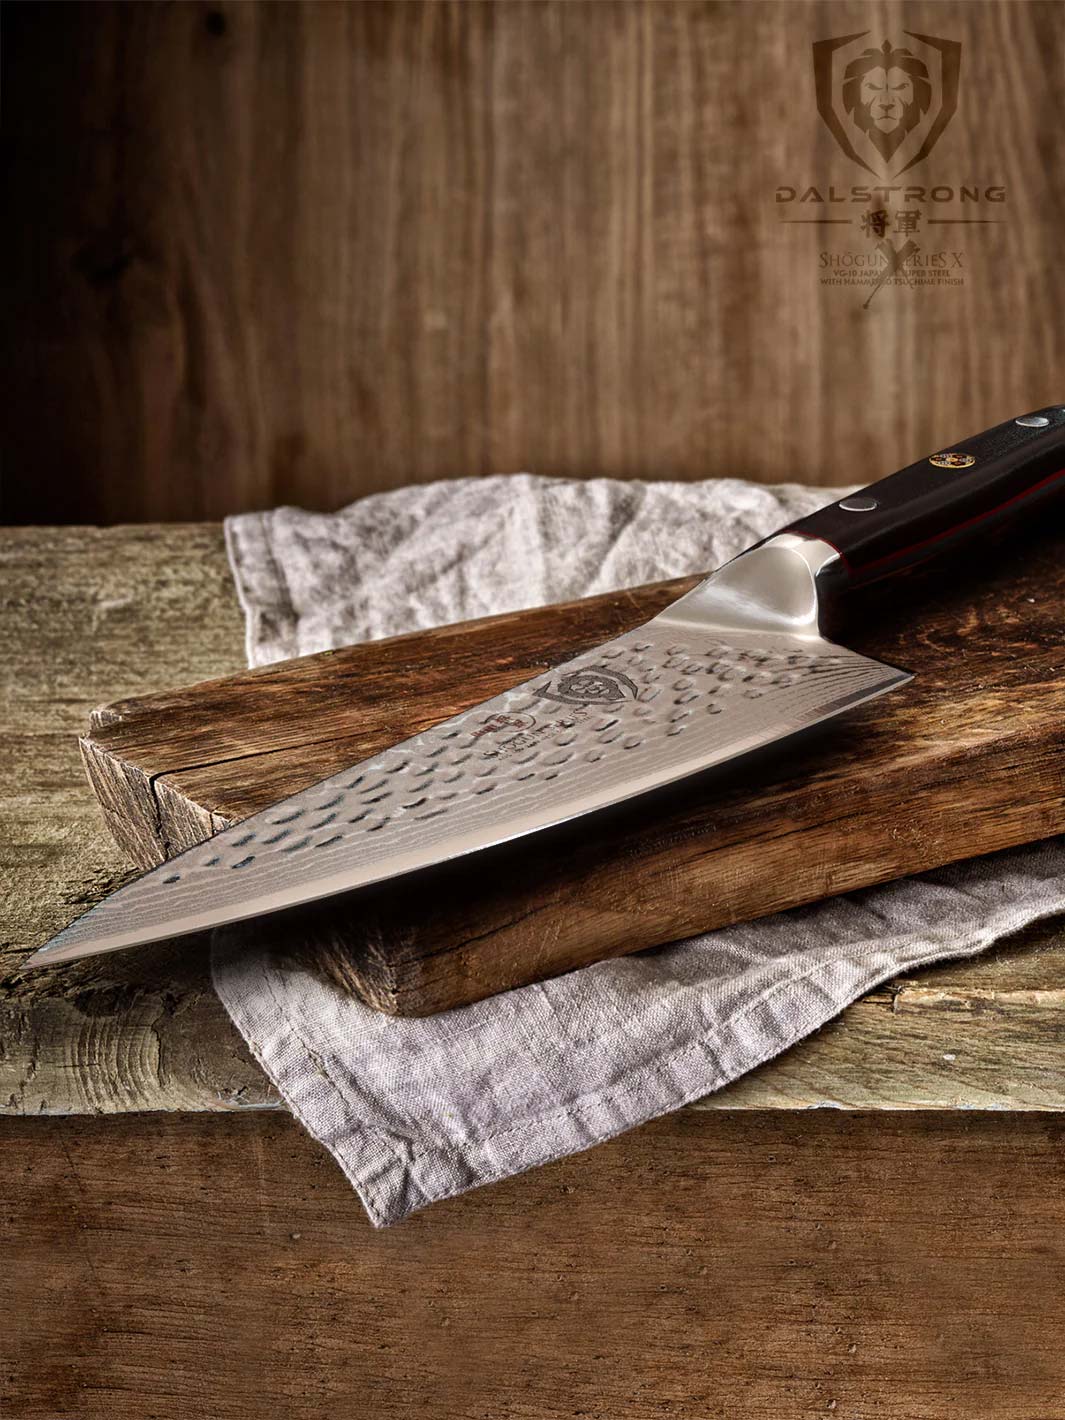 Dalstrong shogun series 6 inch chef knife with black handle on top of a wooden board.